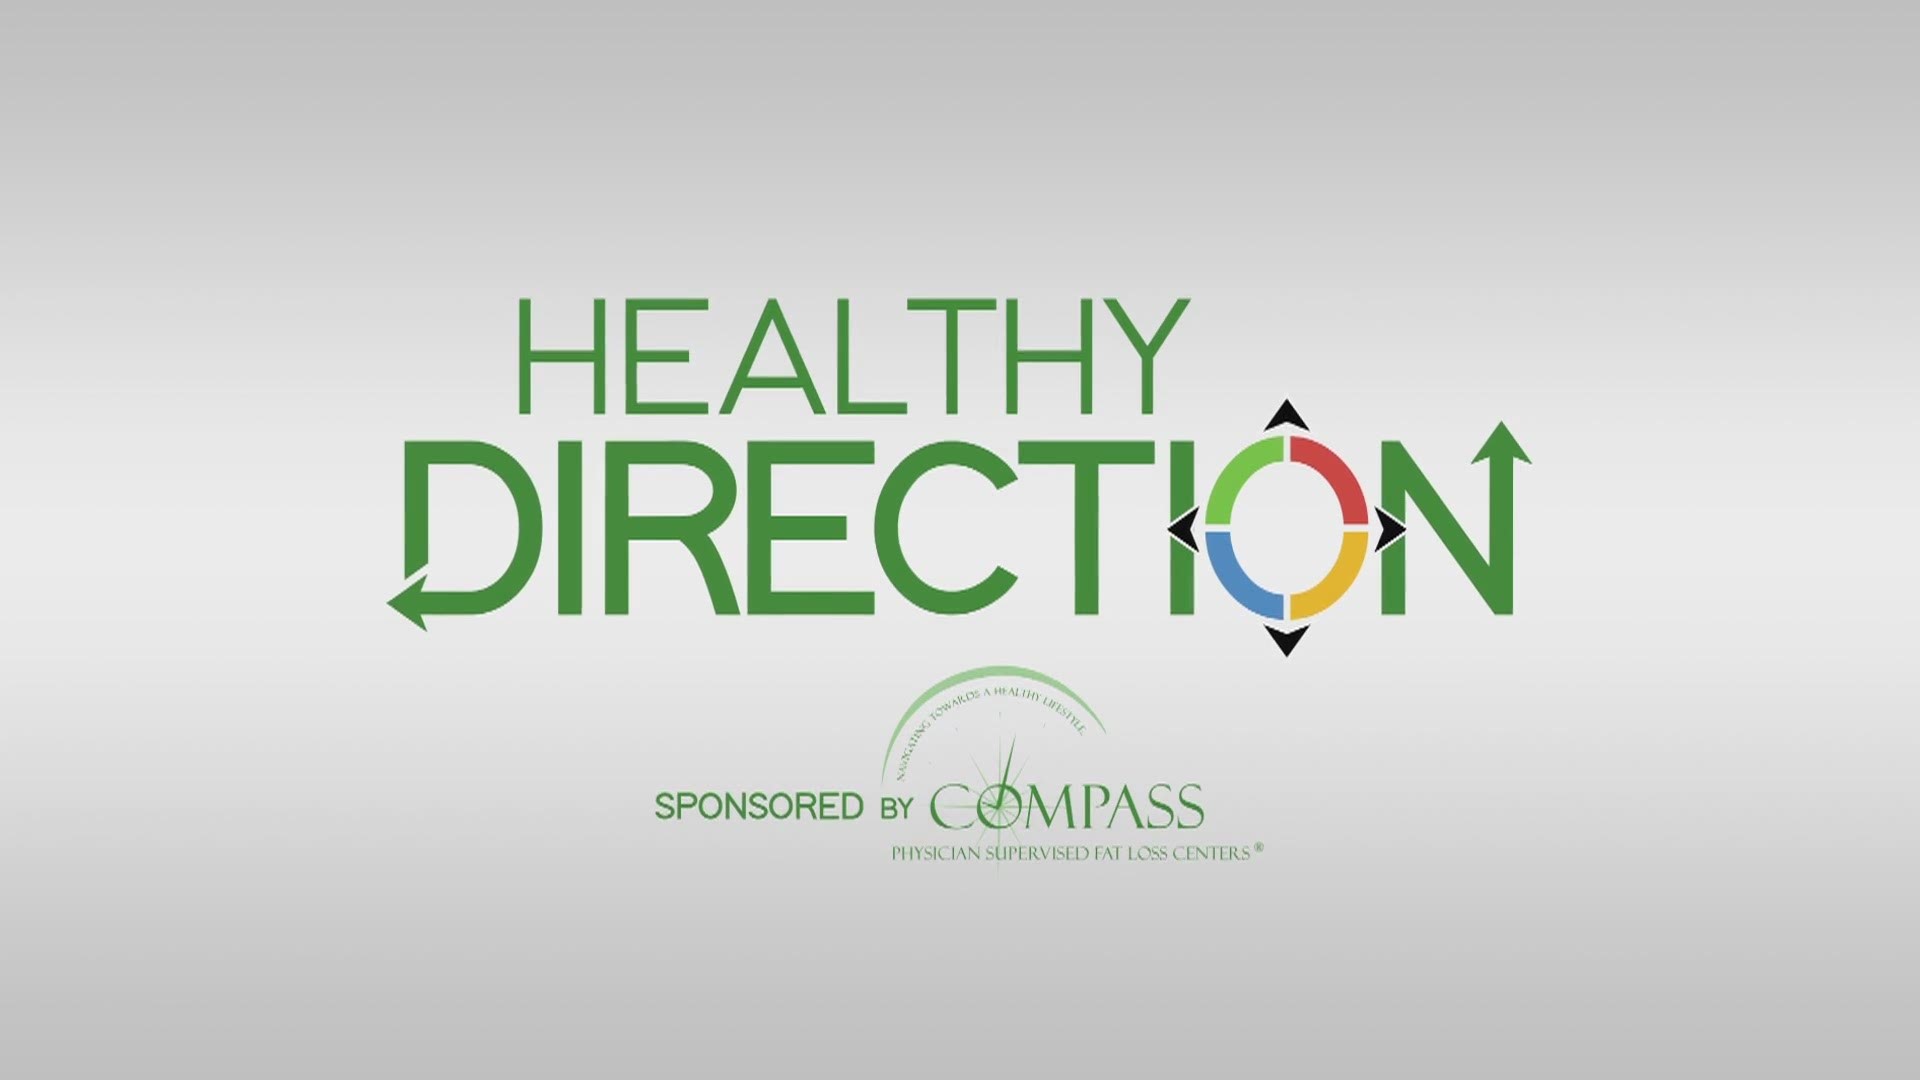 On this segment of Healthy Direction, Dr. Kusher from Compass Fat Loss explains how his virtual practice is working and what he is doing to help others.